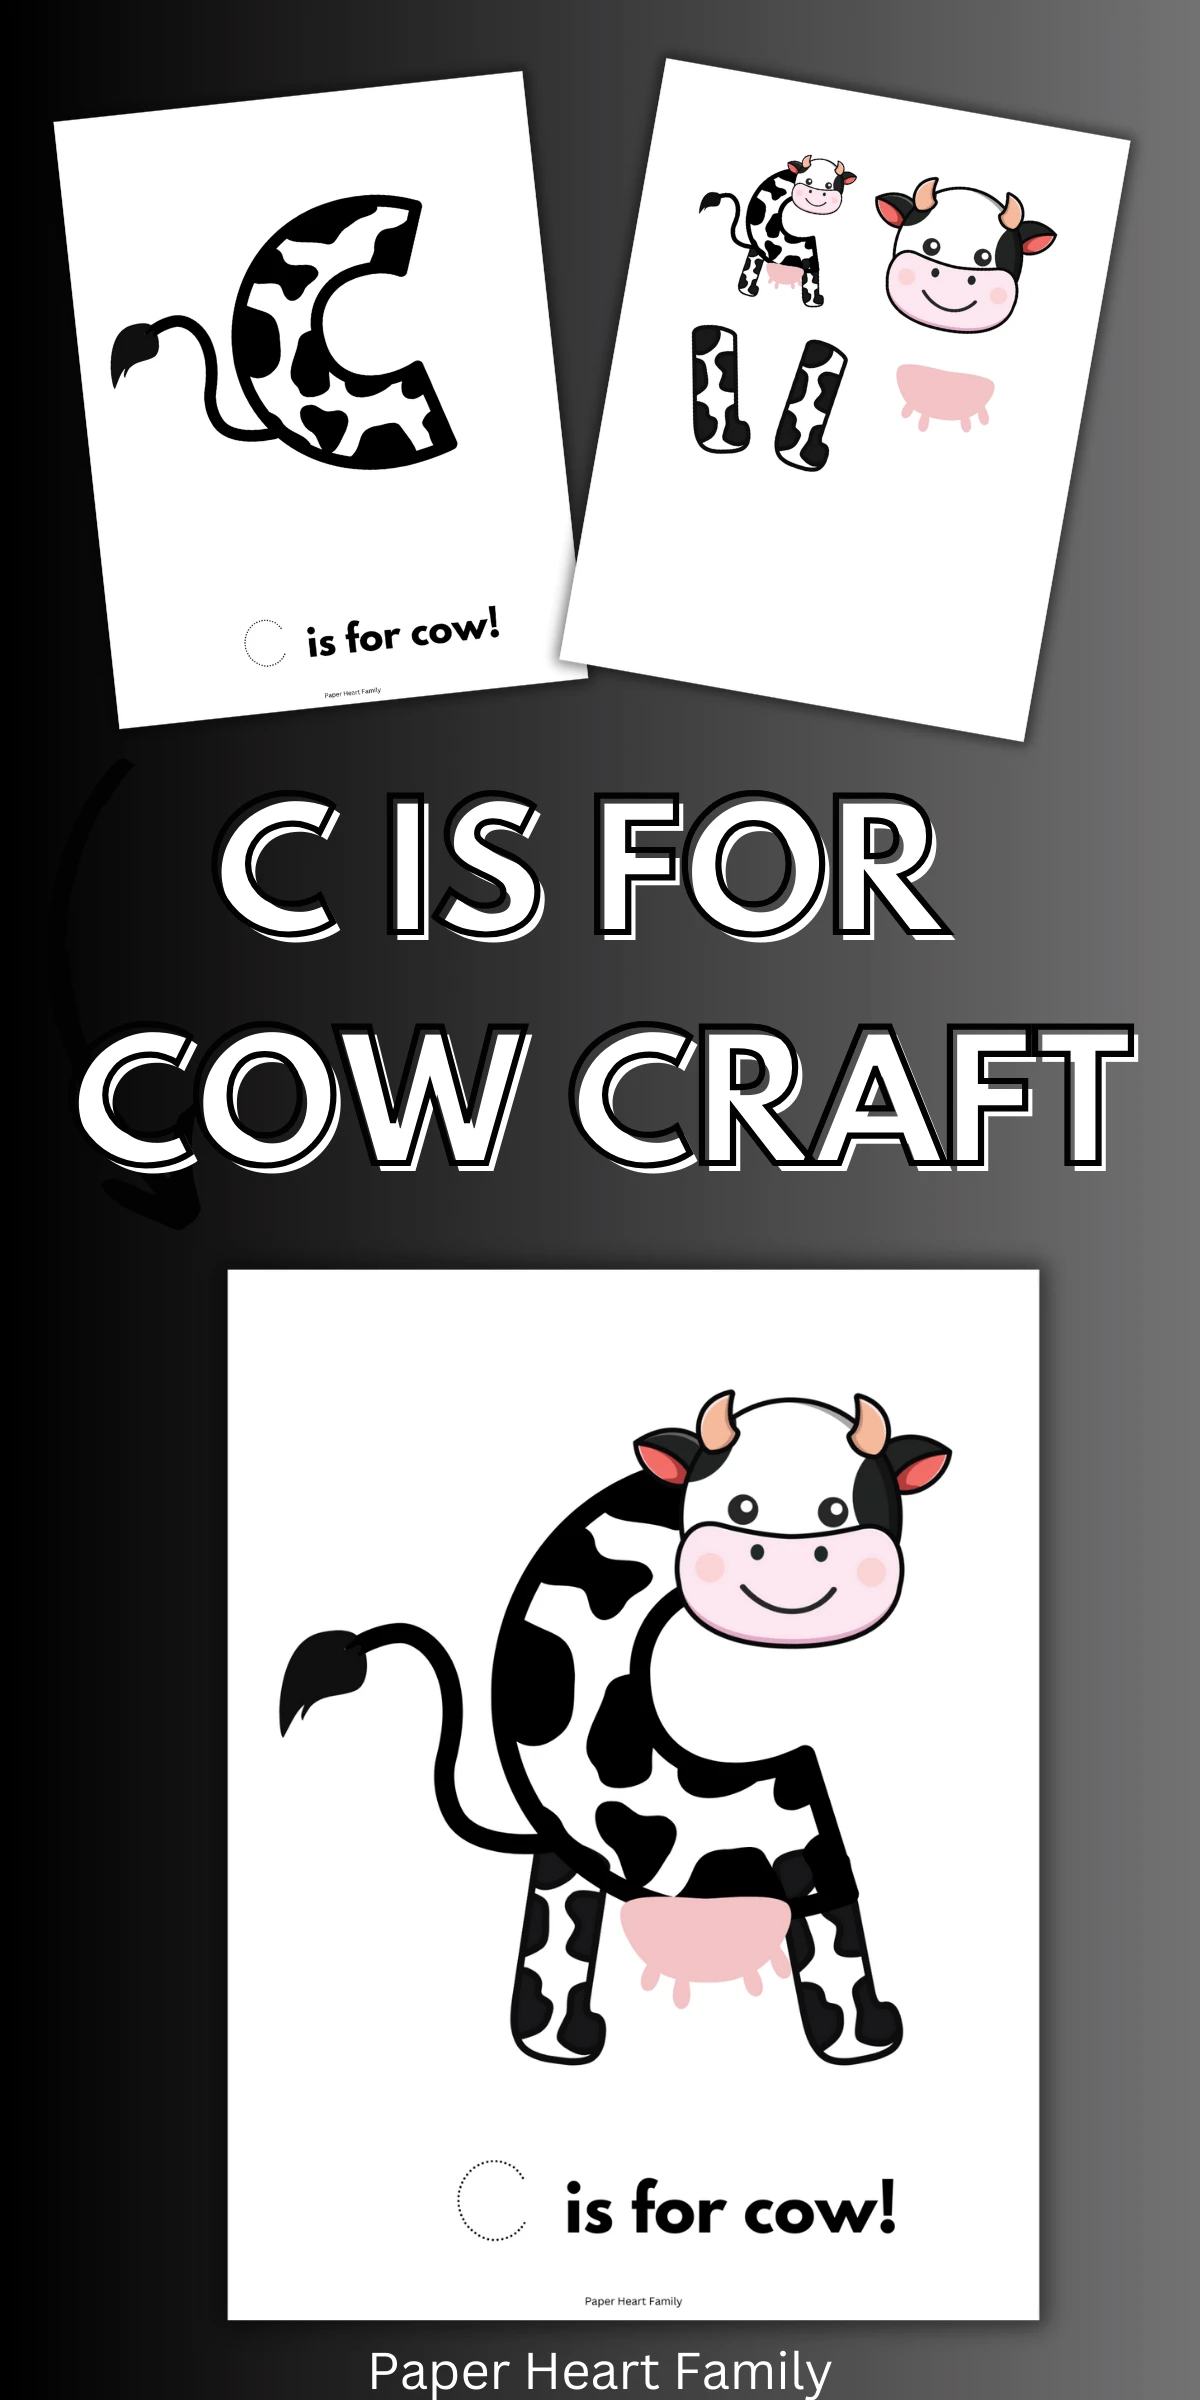 Cow craft with cut and paste head, legs and udder.